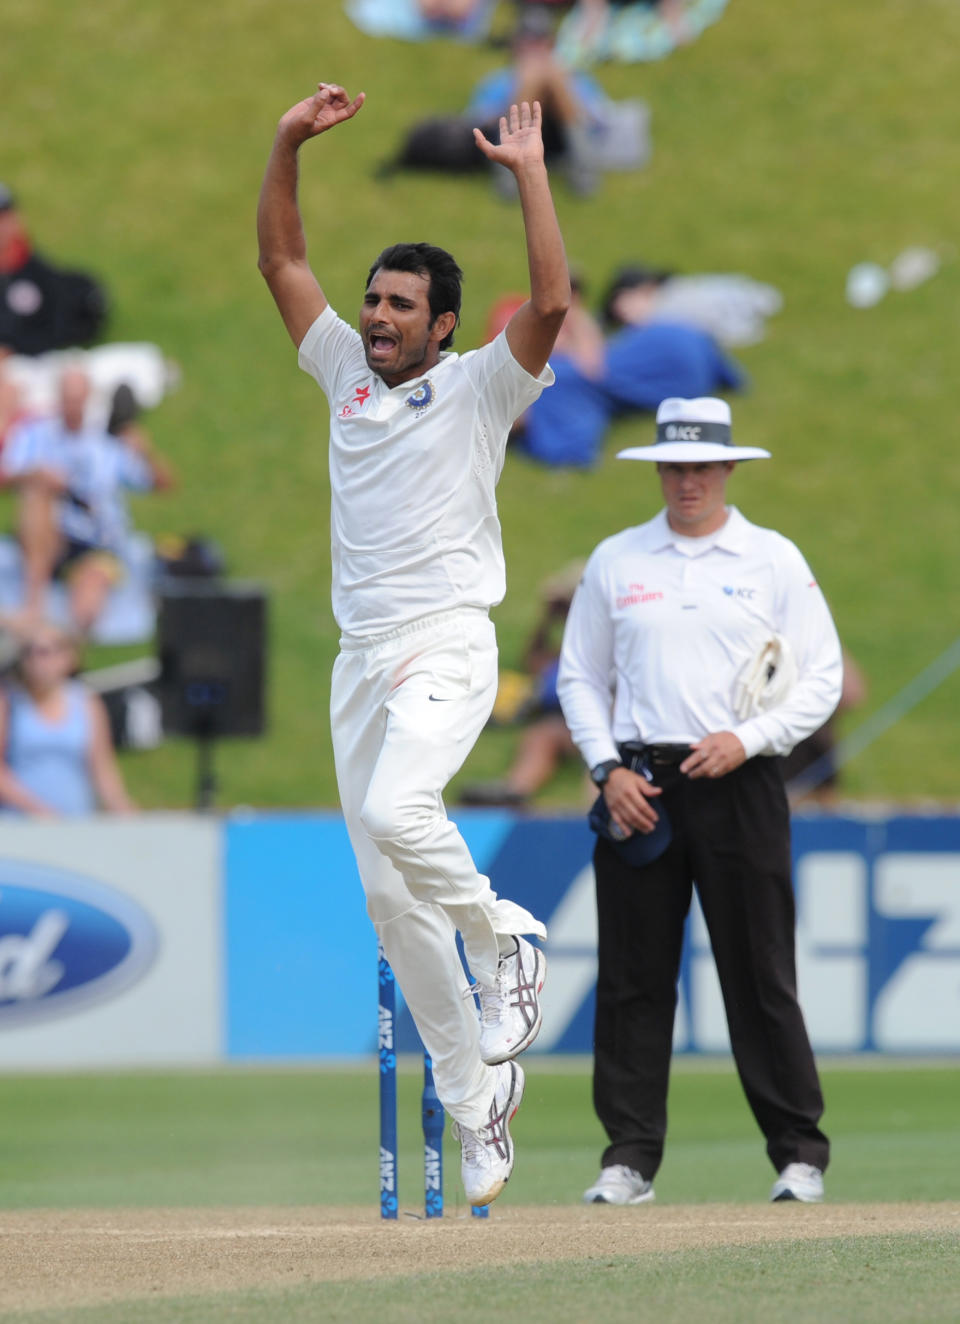 India’s Mohammed Shami reacts to a dropped catch off his bowling against New Zealand on the fourth day of their second cricket test mat at Basin Reserve in Wellington, New Zealand, Monday, Feb. 17, 2014. (AP Photo/SNPA, Ross Setford) NEW ZEALAND OUT